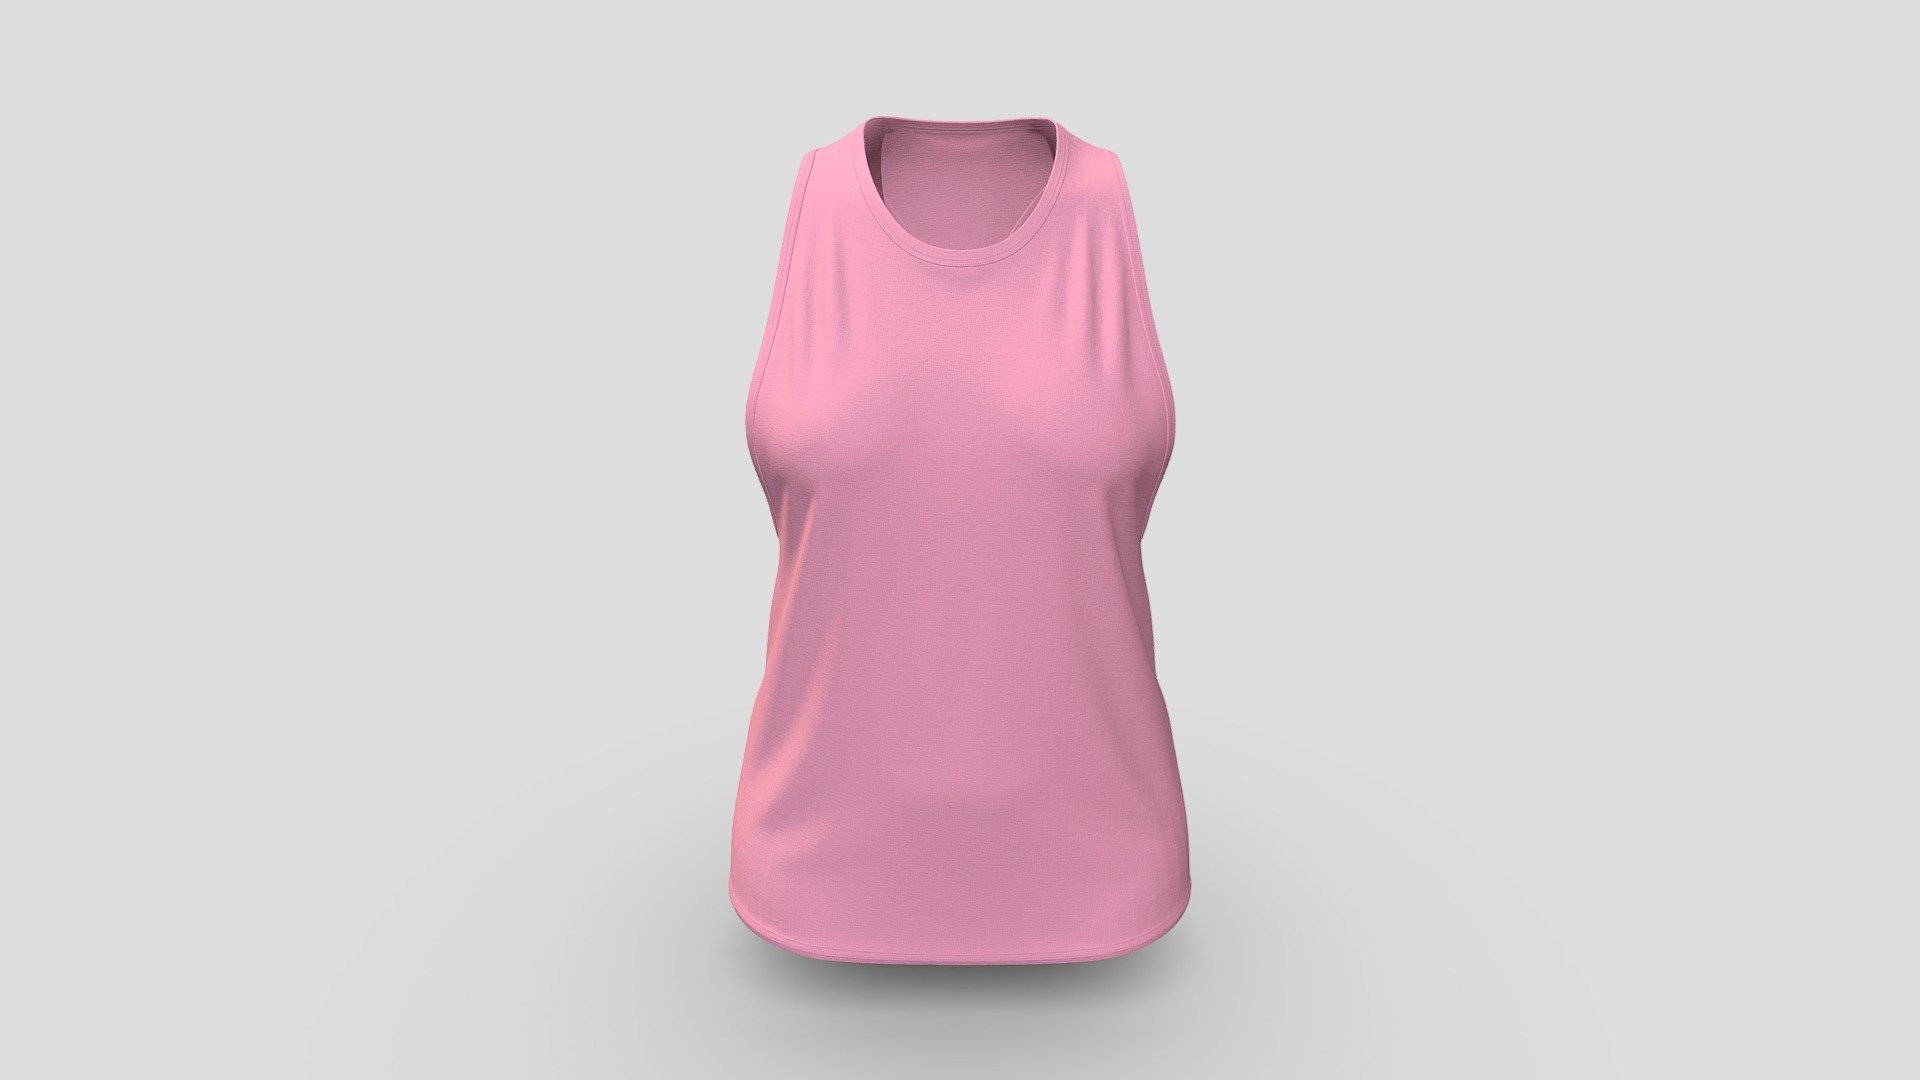 Cloth Title = Female Sport Top Women Workout Tank Top 

SKU = DG100212 

Category = Women 

Product Type = Tank Top 

Cloth Length = Regular 
 
Body Fit = Fitted 

Occasion = Activewear 


Our Services:

3D Apparel Design.

OBJ,FBX,GLTF Making with High/Low Poly.

Fabric Digitalization.

Mockup making.

3D Teck Pack.

Pattern Making.

2D Illustration.

Cloth Animation and 360 Spin Video.


Contact us:- 

Email: info@digitalfashionwear.com 

Website: https://digitalfashionwear.com 


We designed all the types of cloth specially focused on product visualization, e-commerce, fitting, and production. 

We will design: 

T-shirts 

Polo shirts 

Hoodies 

Sweatshirt 

Jackets 

Shirts 

TankTops 

Trousers 

Bras 

Underwear 

Blazer 

Aprons 

Leggings 

and All Fashion items. 





Our goal is to make sure what we provide you, meets your demand 3d model